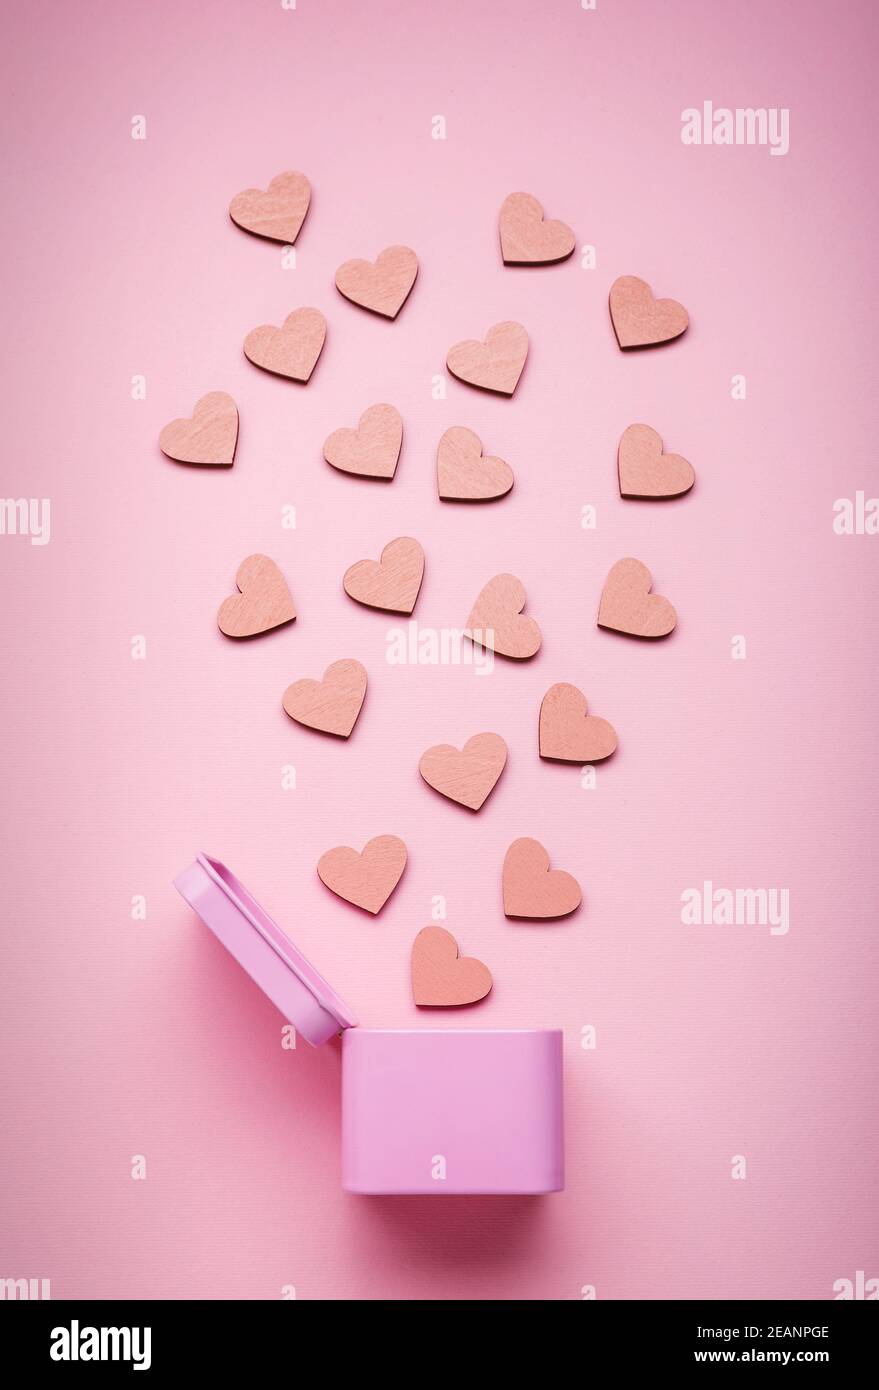 Lots of pink stuff. Pink metal gift box and decorative wooden hearts on pink background. Stock Photo